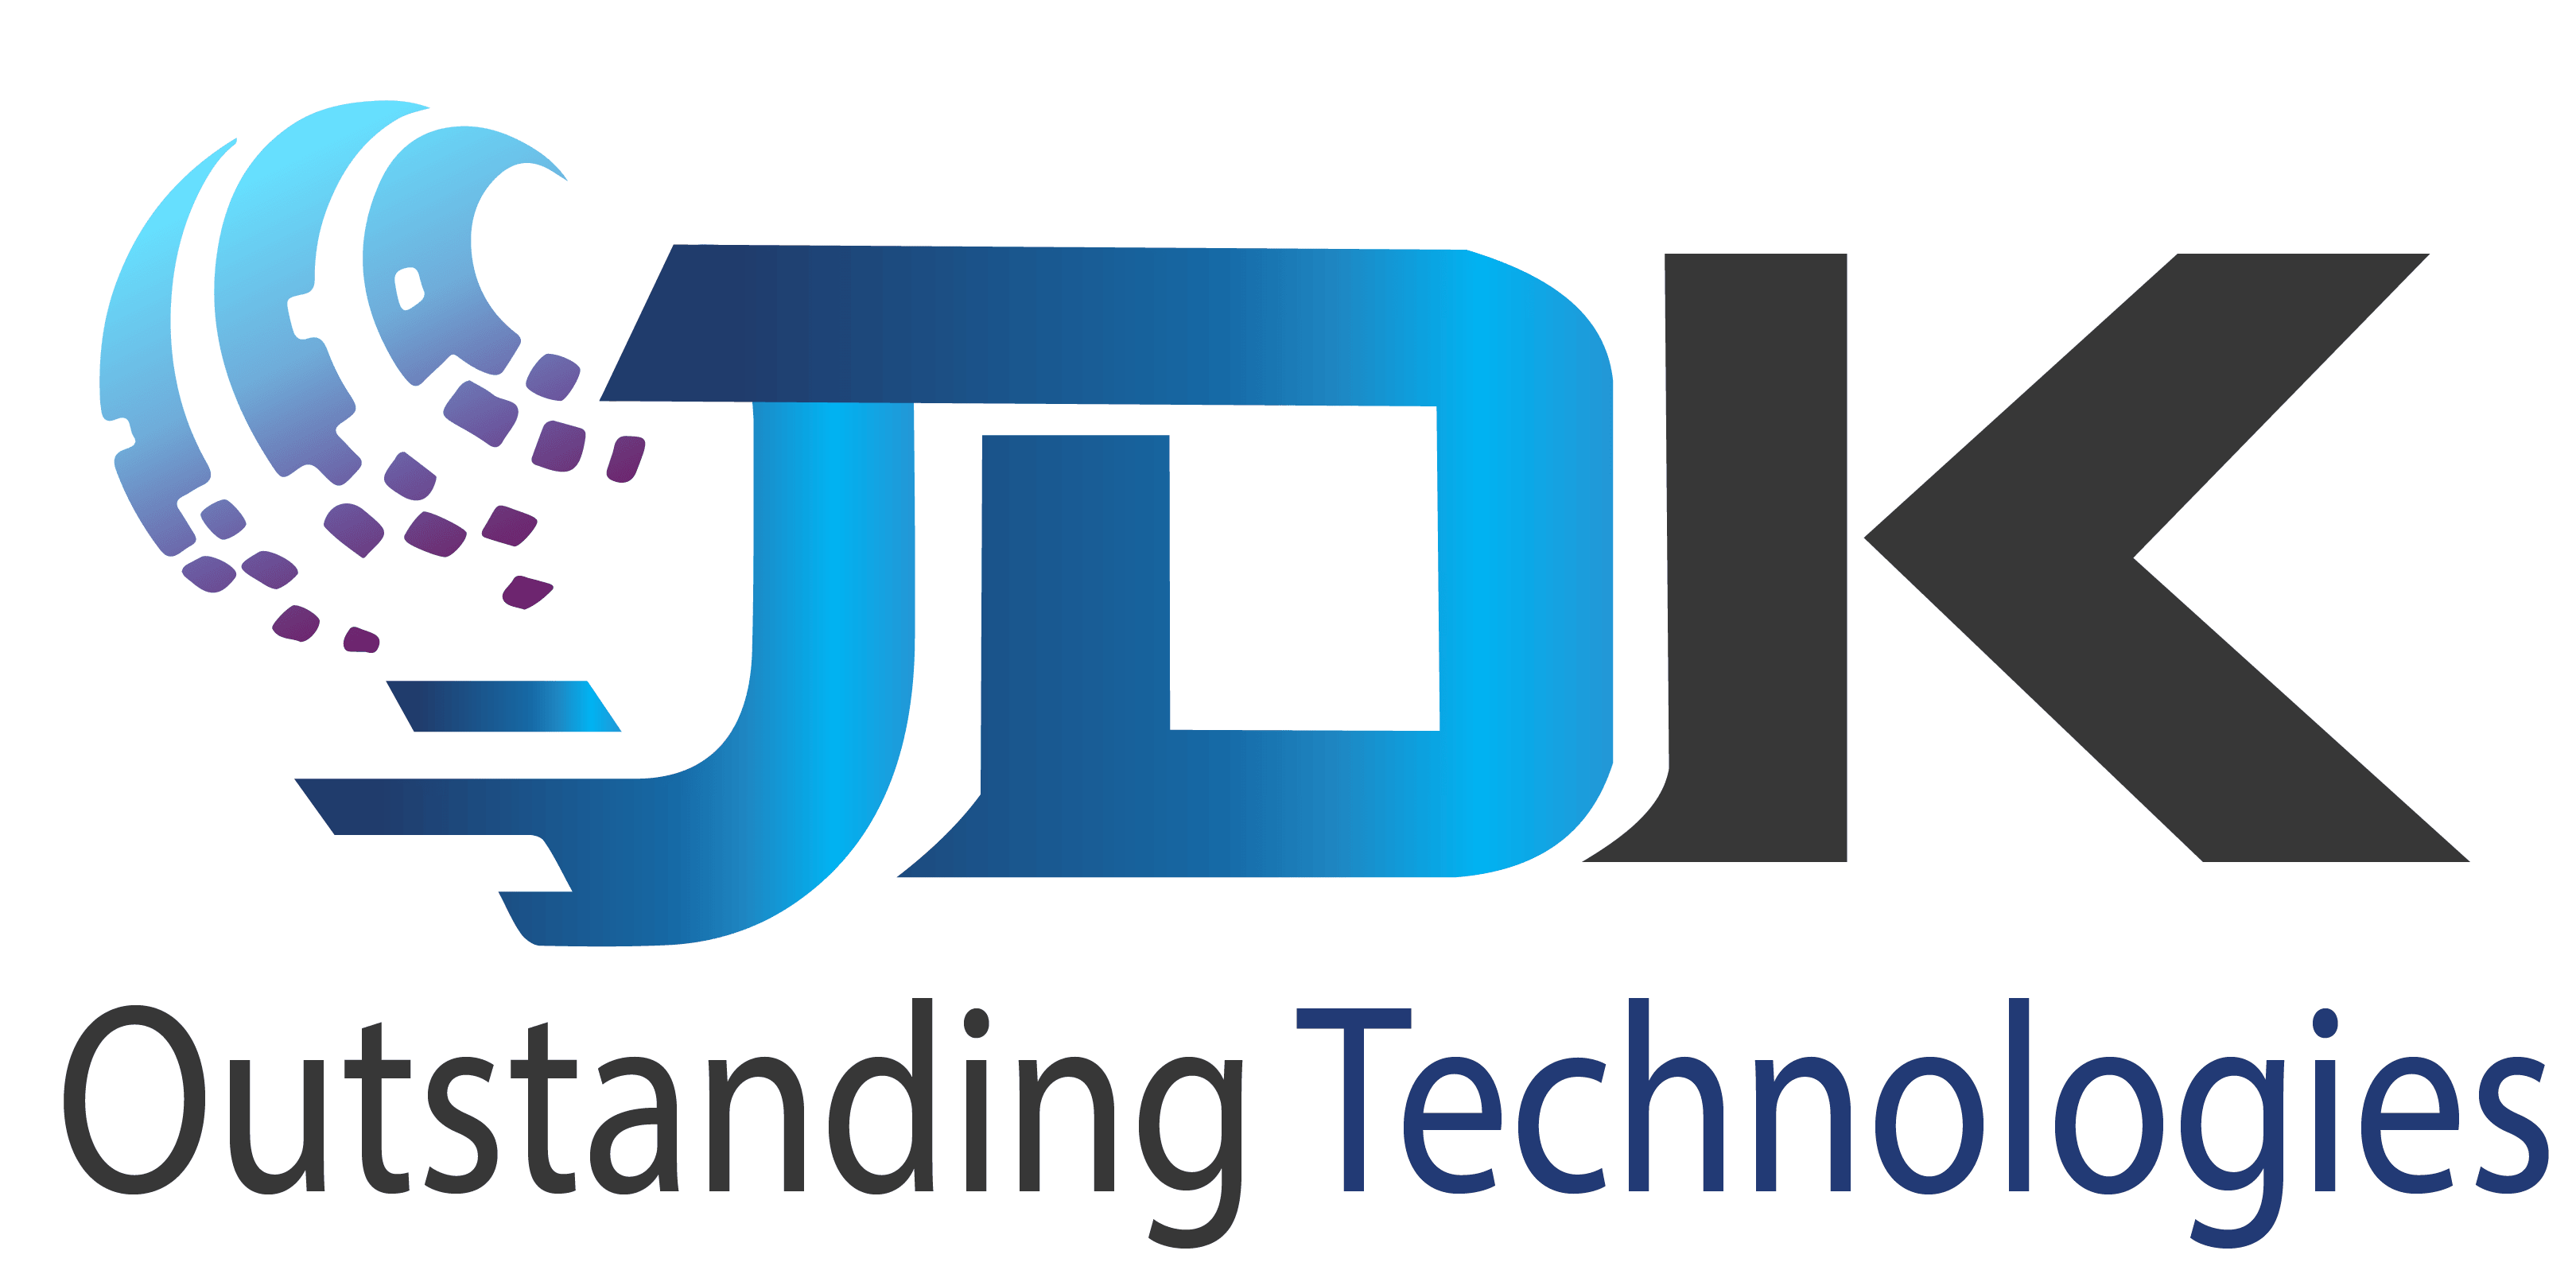 JDK-Outstanding-Technologies-compressed